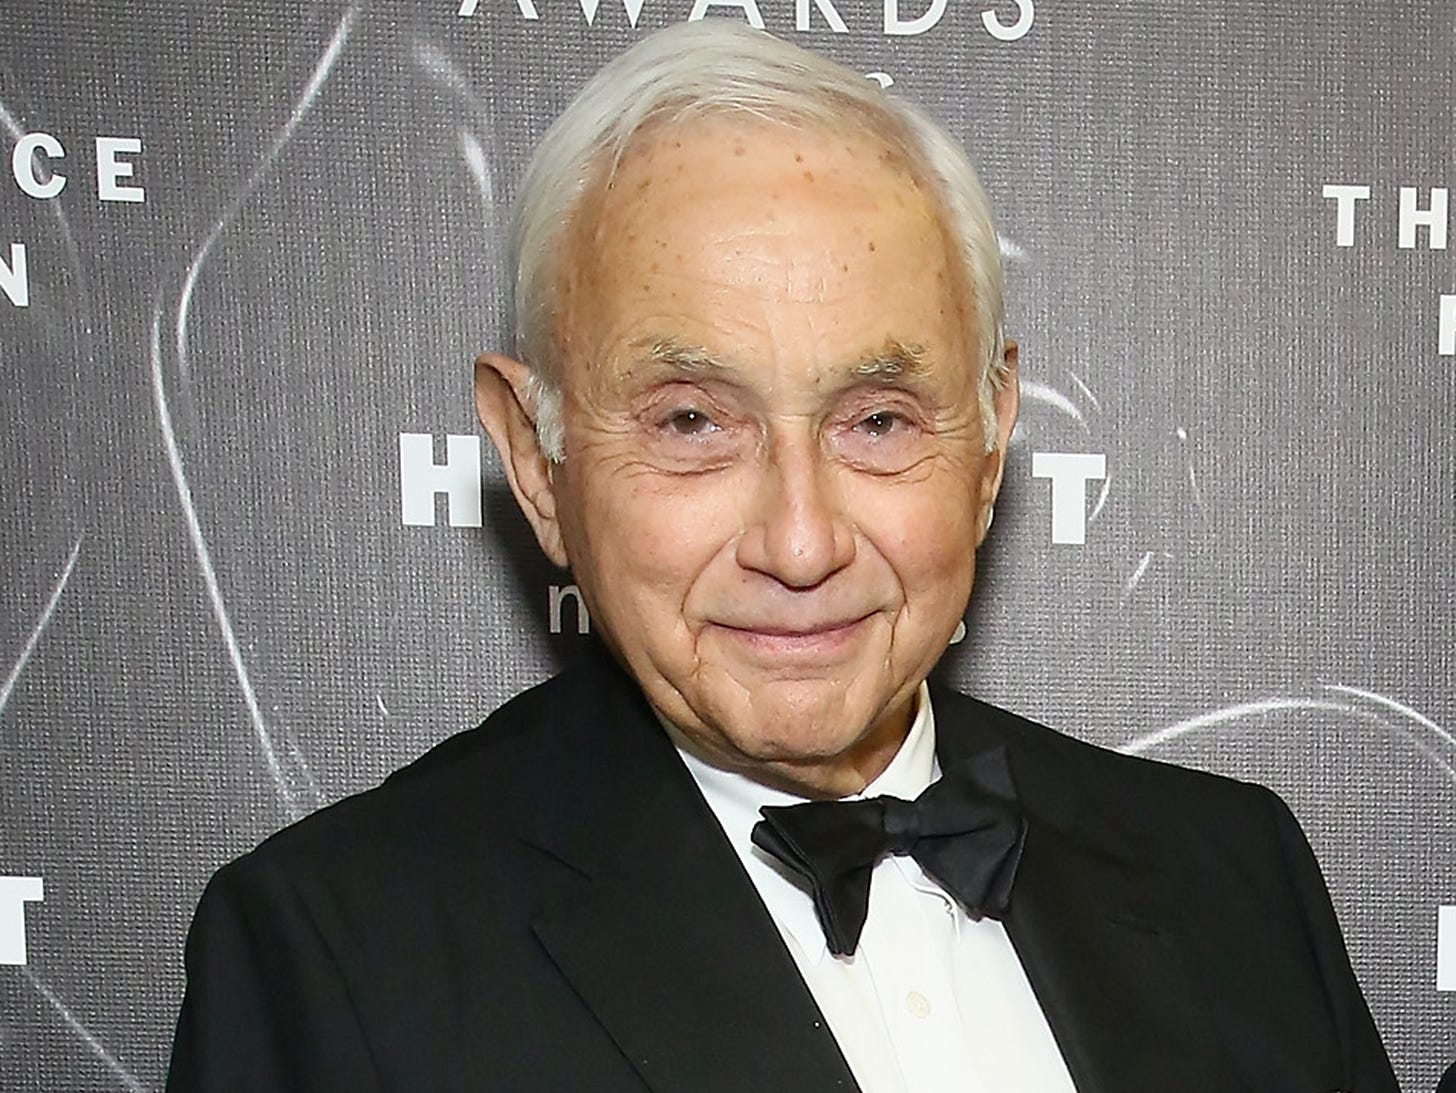 L Brands CEO Les Wexner Needs More Distance From Jeffrey Epstein - Bloomberg